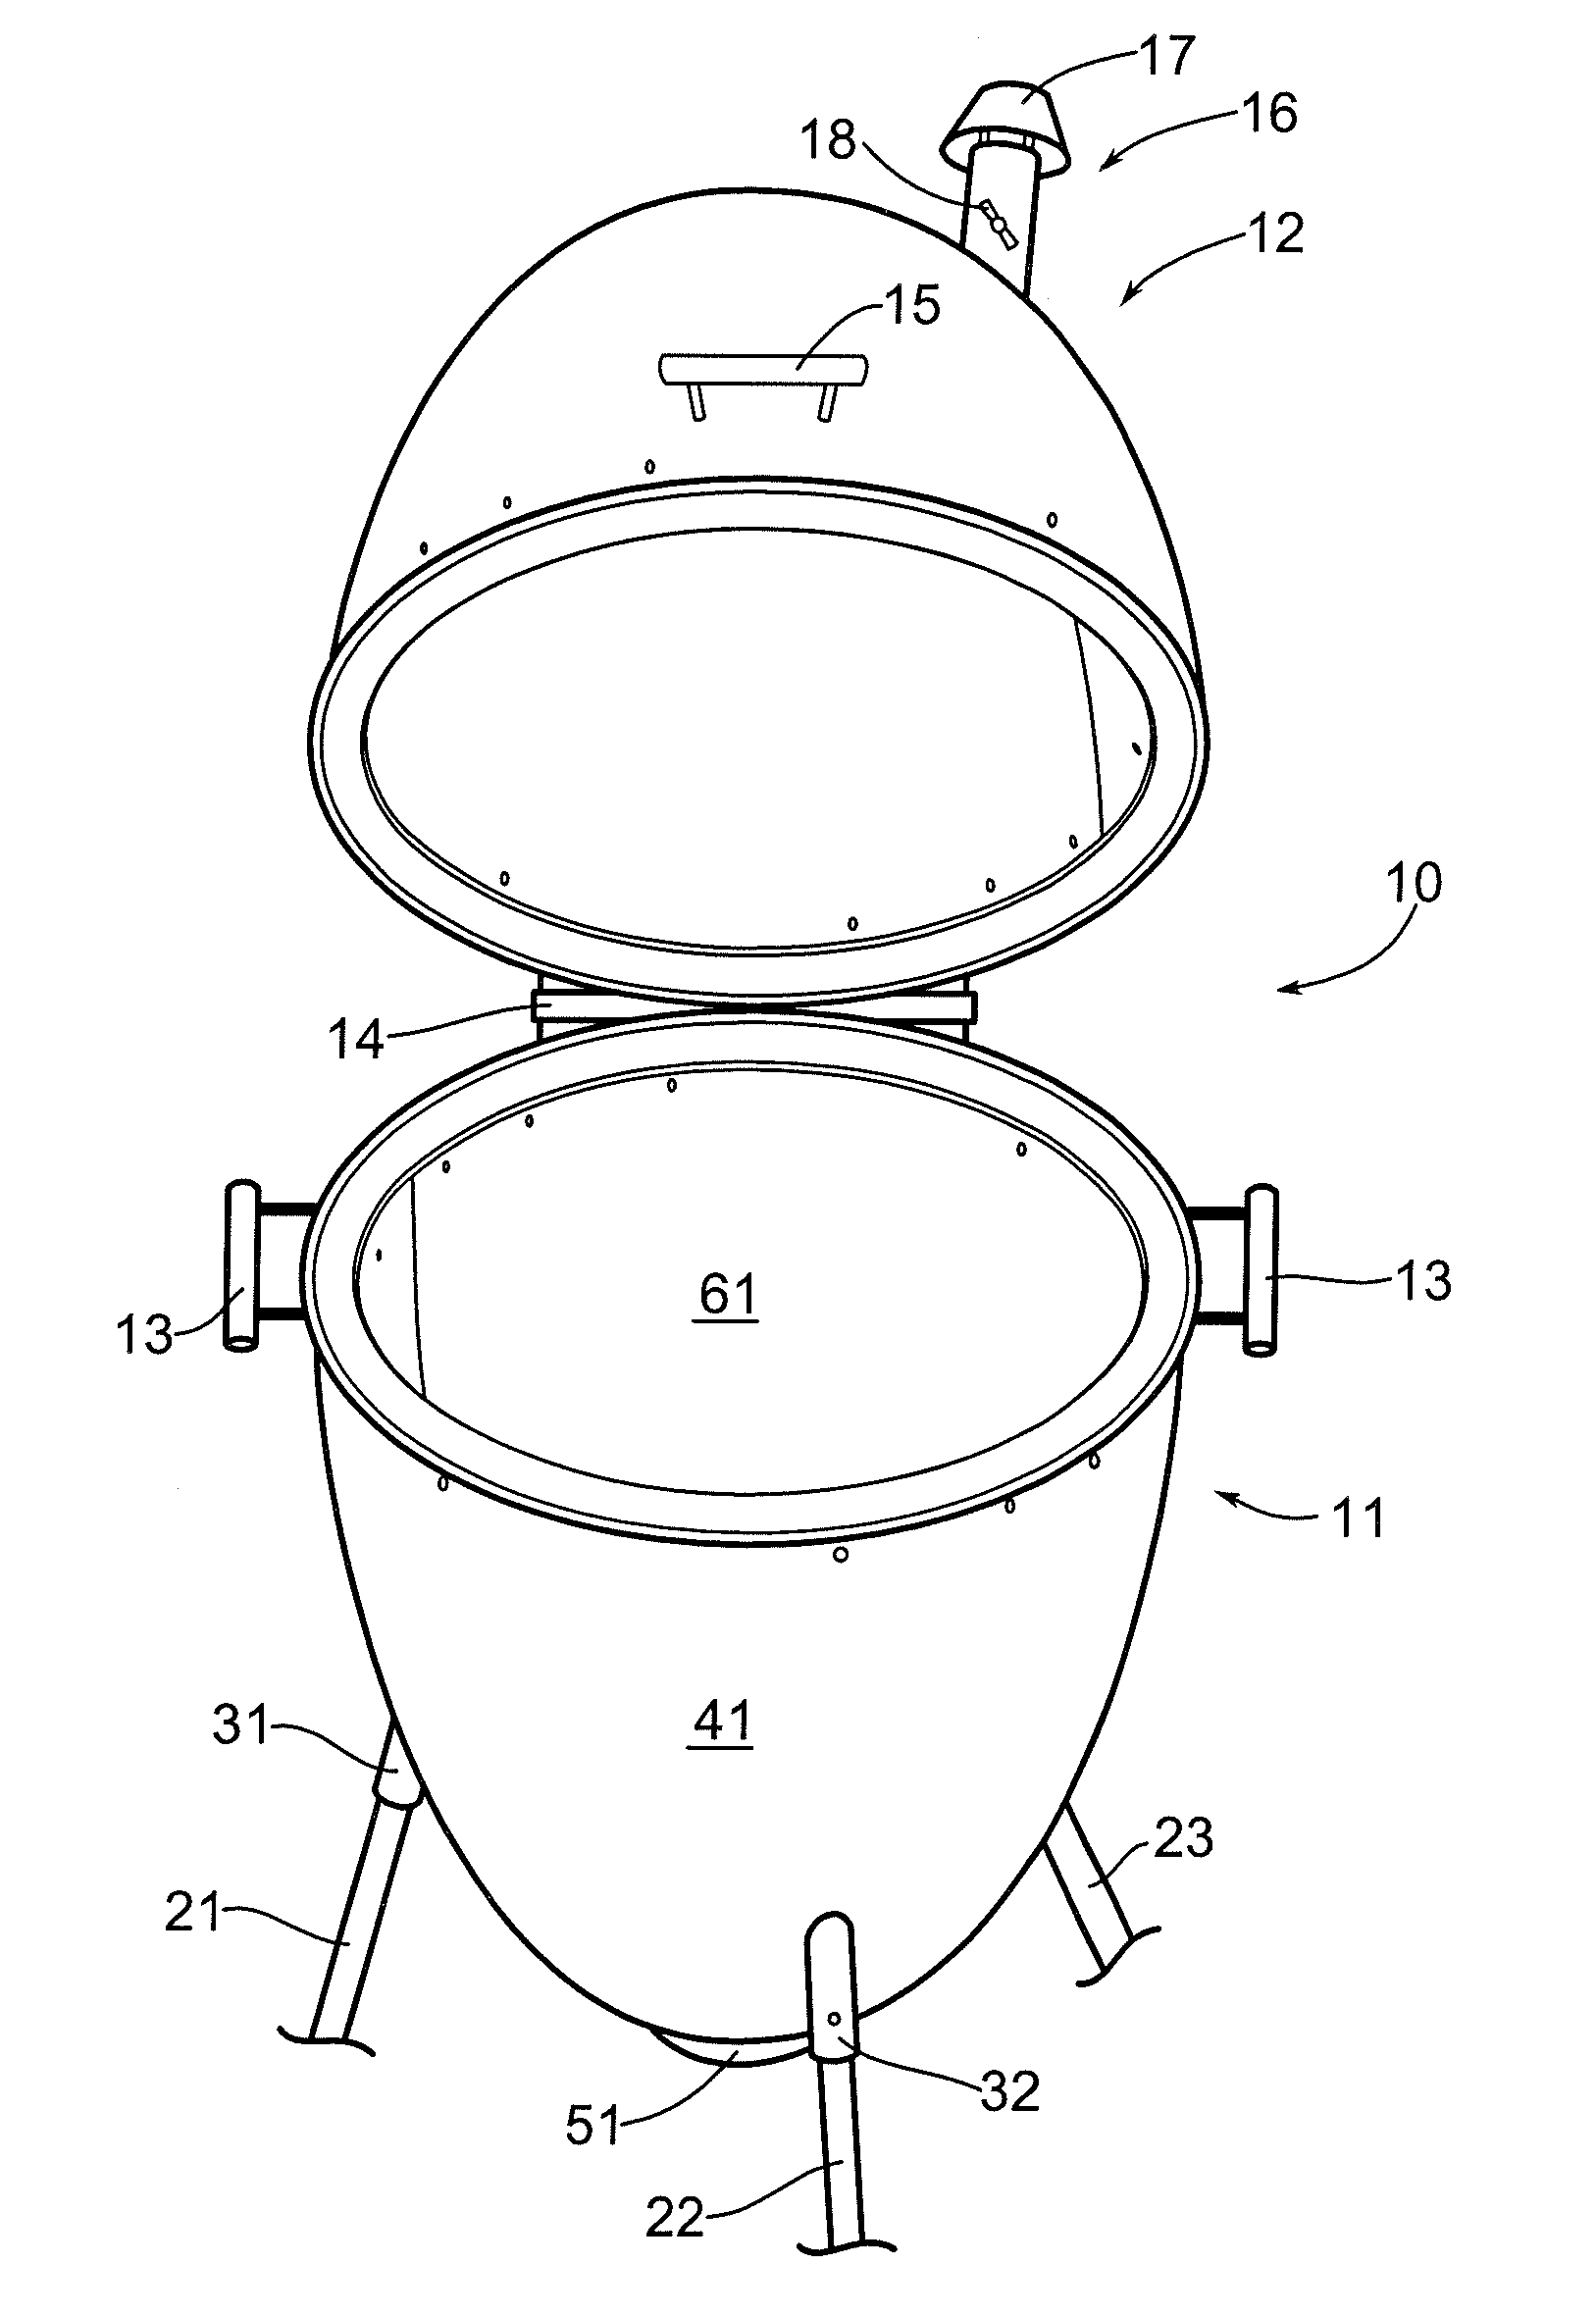 Egg-shaped outdoor cooker